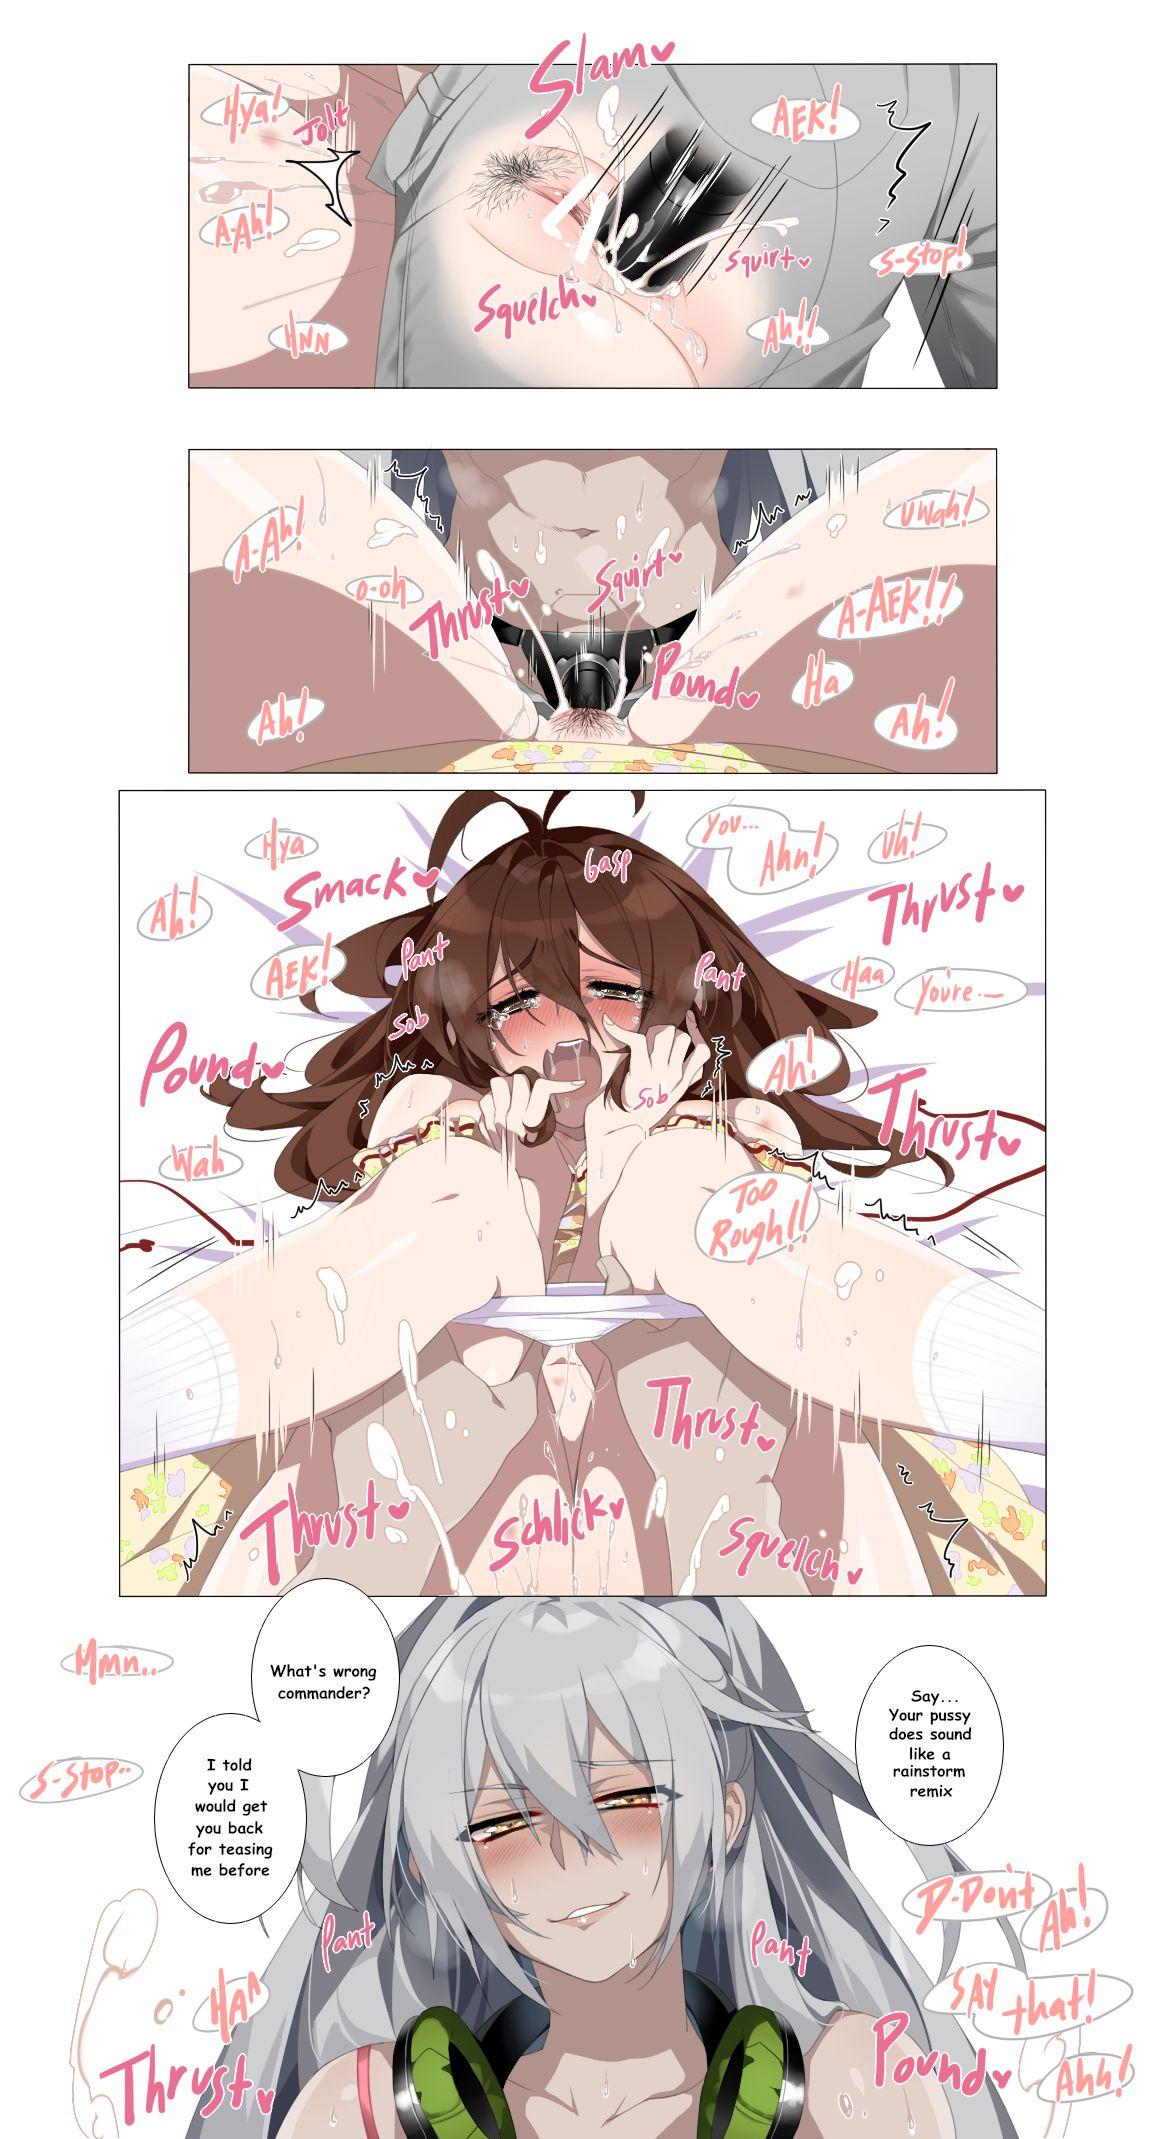 Twinks Time of the Month - Girls frontline Pornstar - Page 5